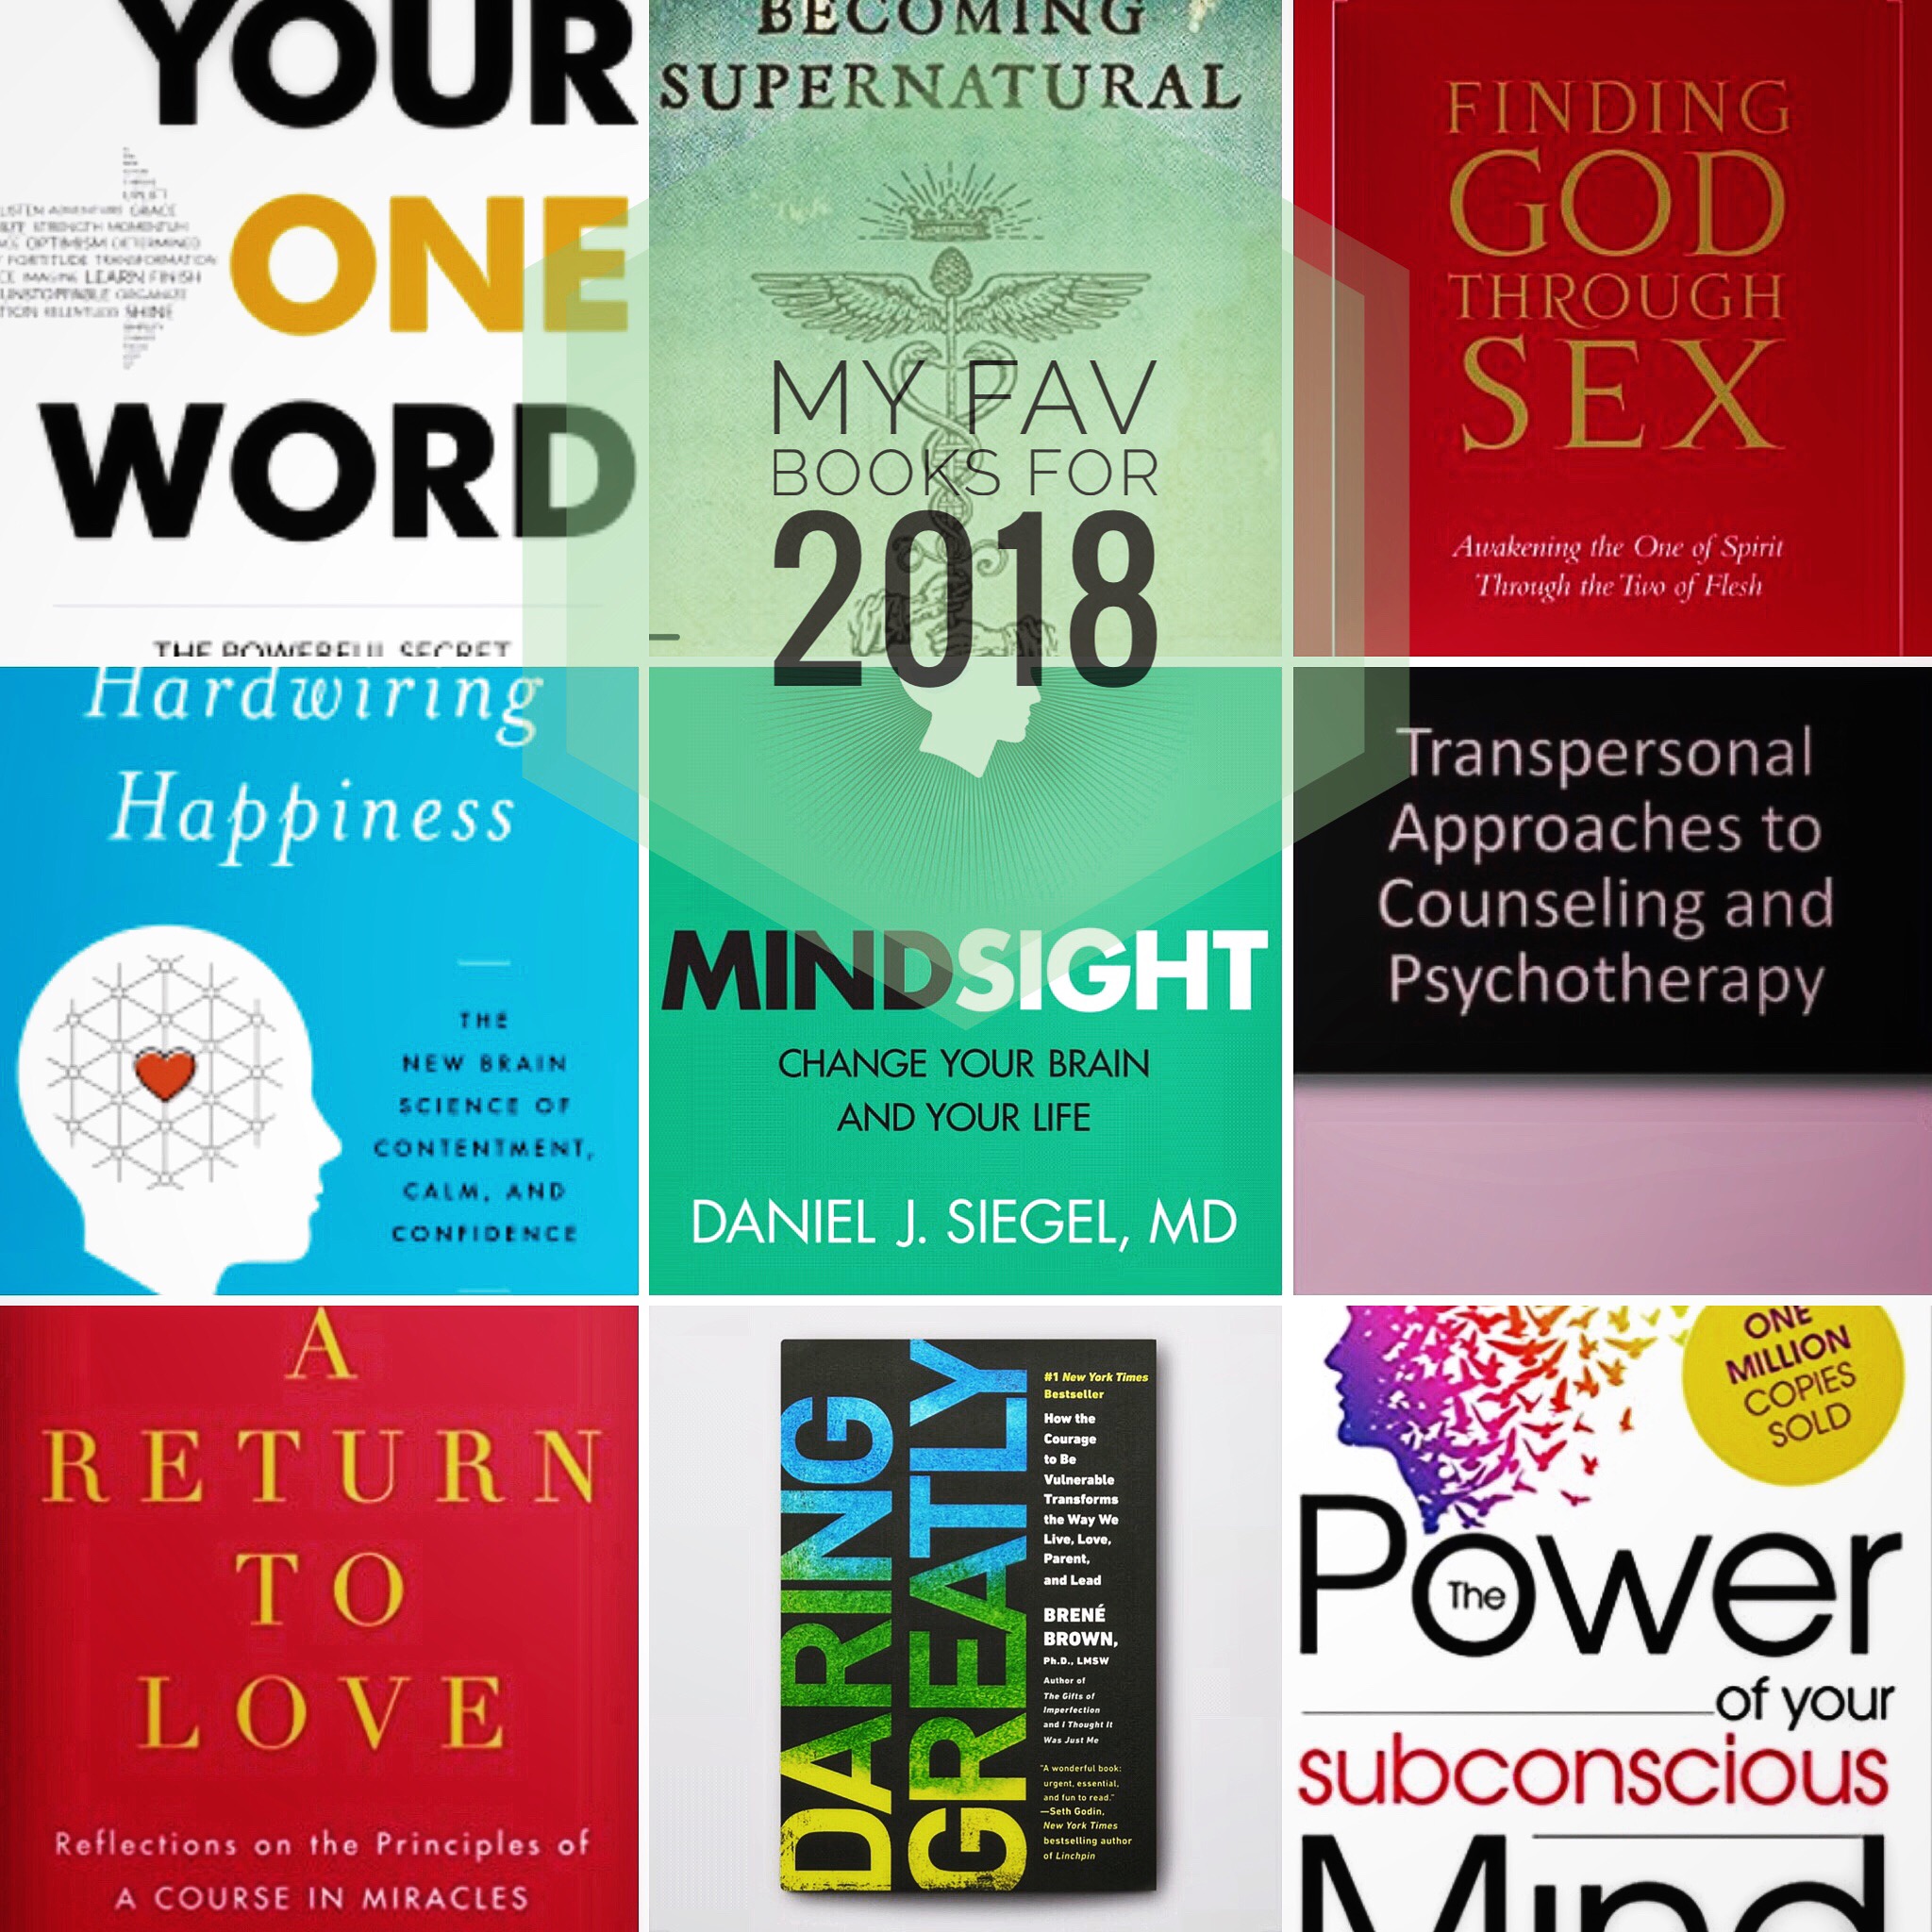 My Favorite Books for 2018